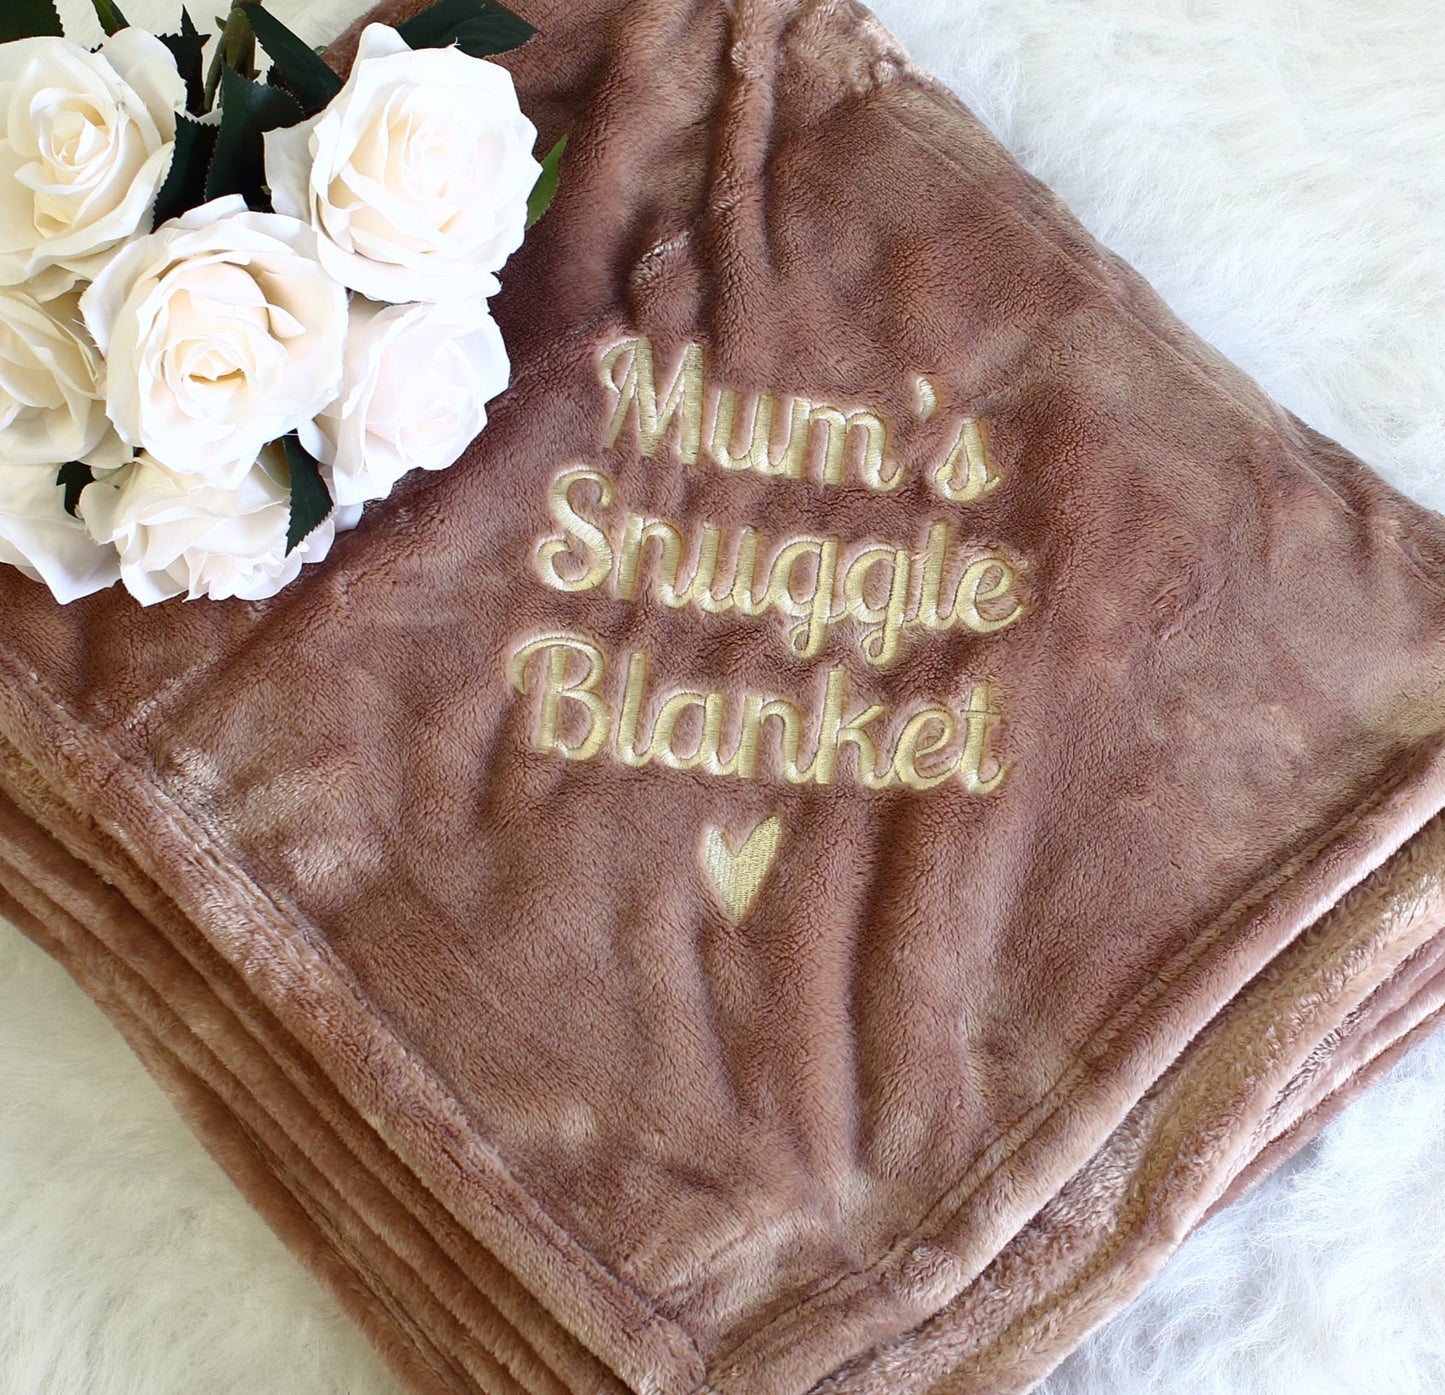 NEW - Embroidered Blanket - Name's snuggle